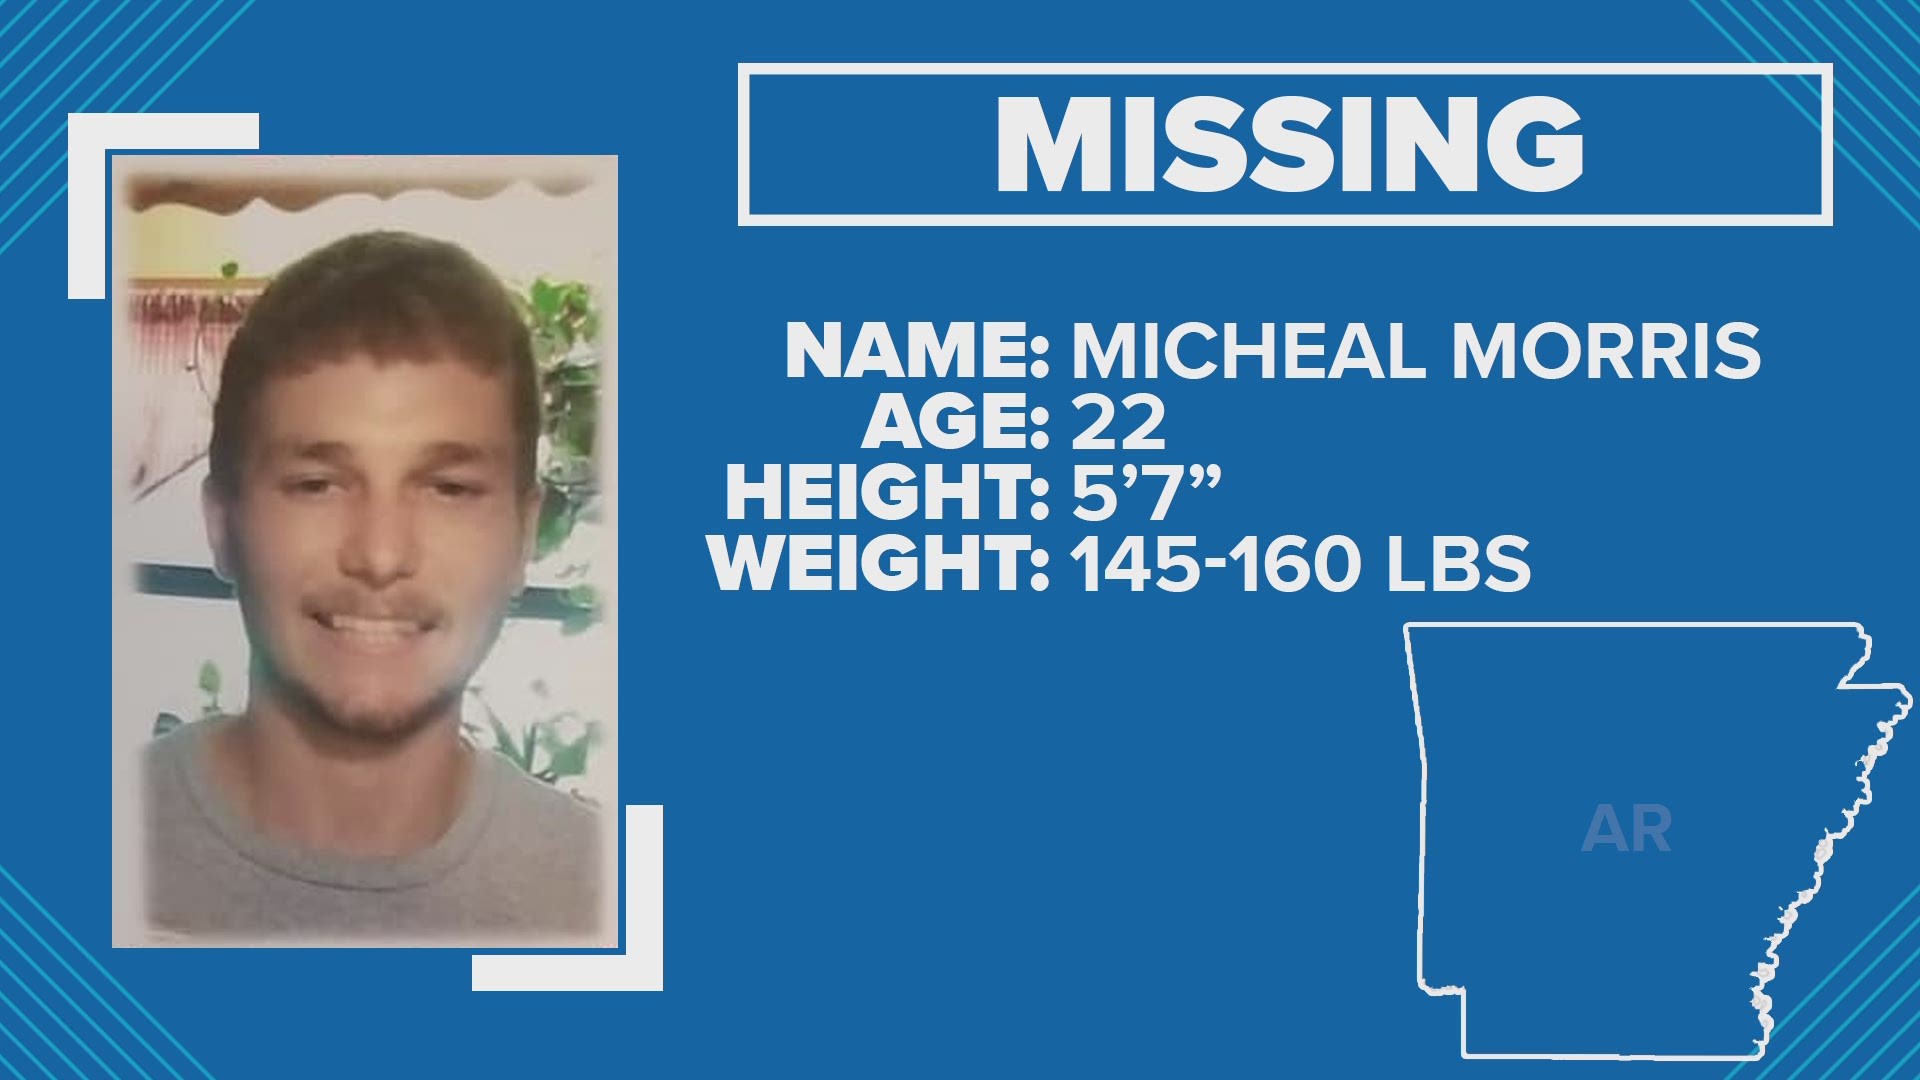 On January 28, 2019, Micheal Morris walked away from his brother in Olyphant, Arkansas and hasn’t been seen since.